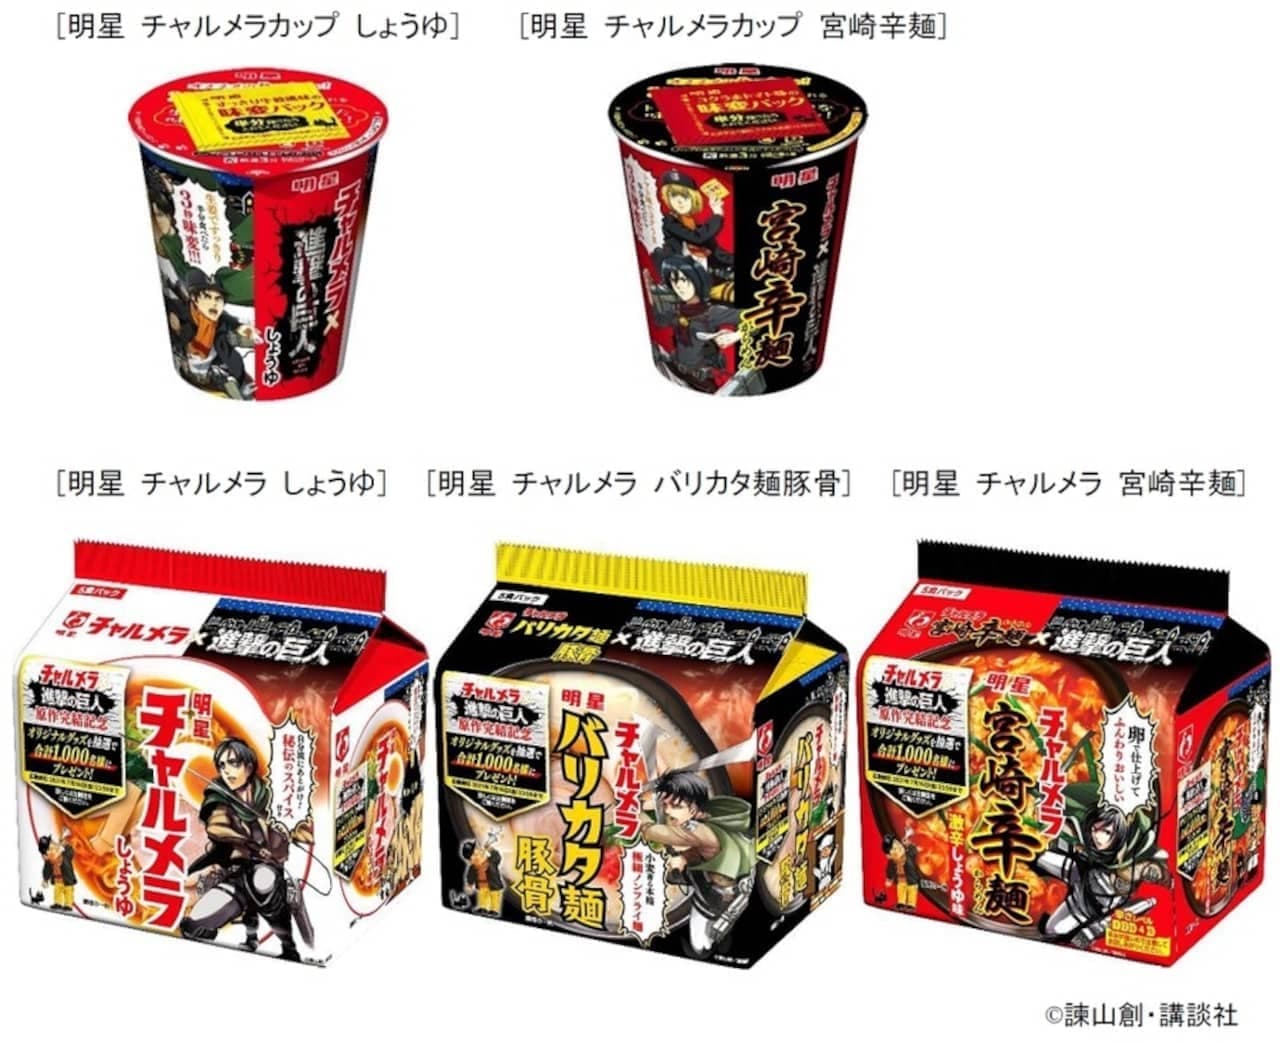 Myojo Charmera Cup Attack on Titan Consomme Soy Sauce